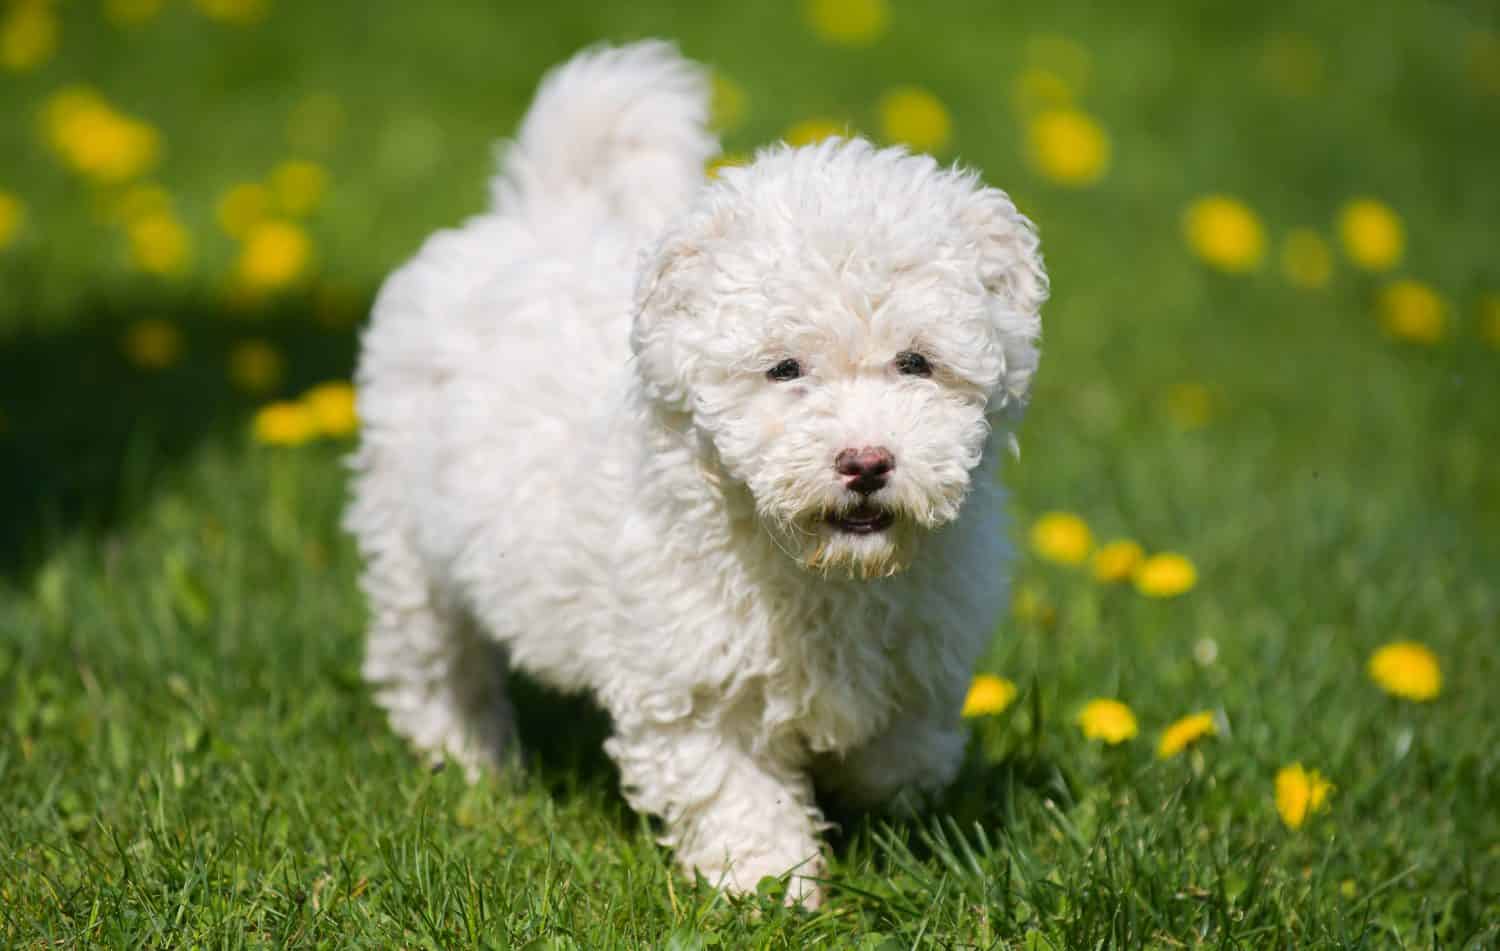 Puli white dog puppy cub standing on a grass and looking to the camera. Beautiful dog breed. Pet photography.